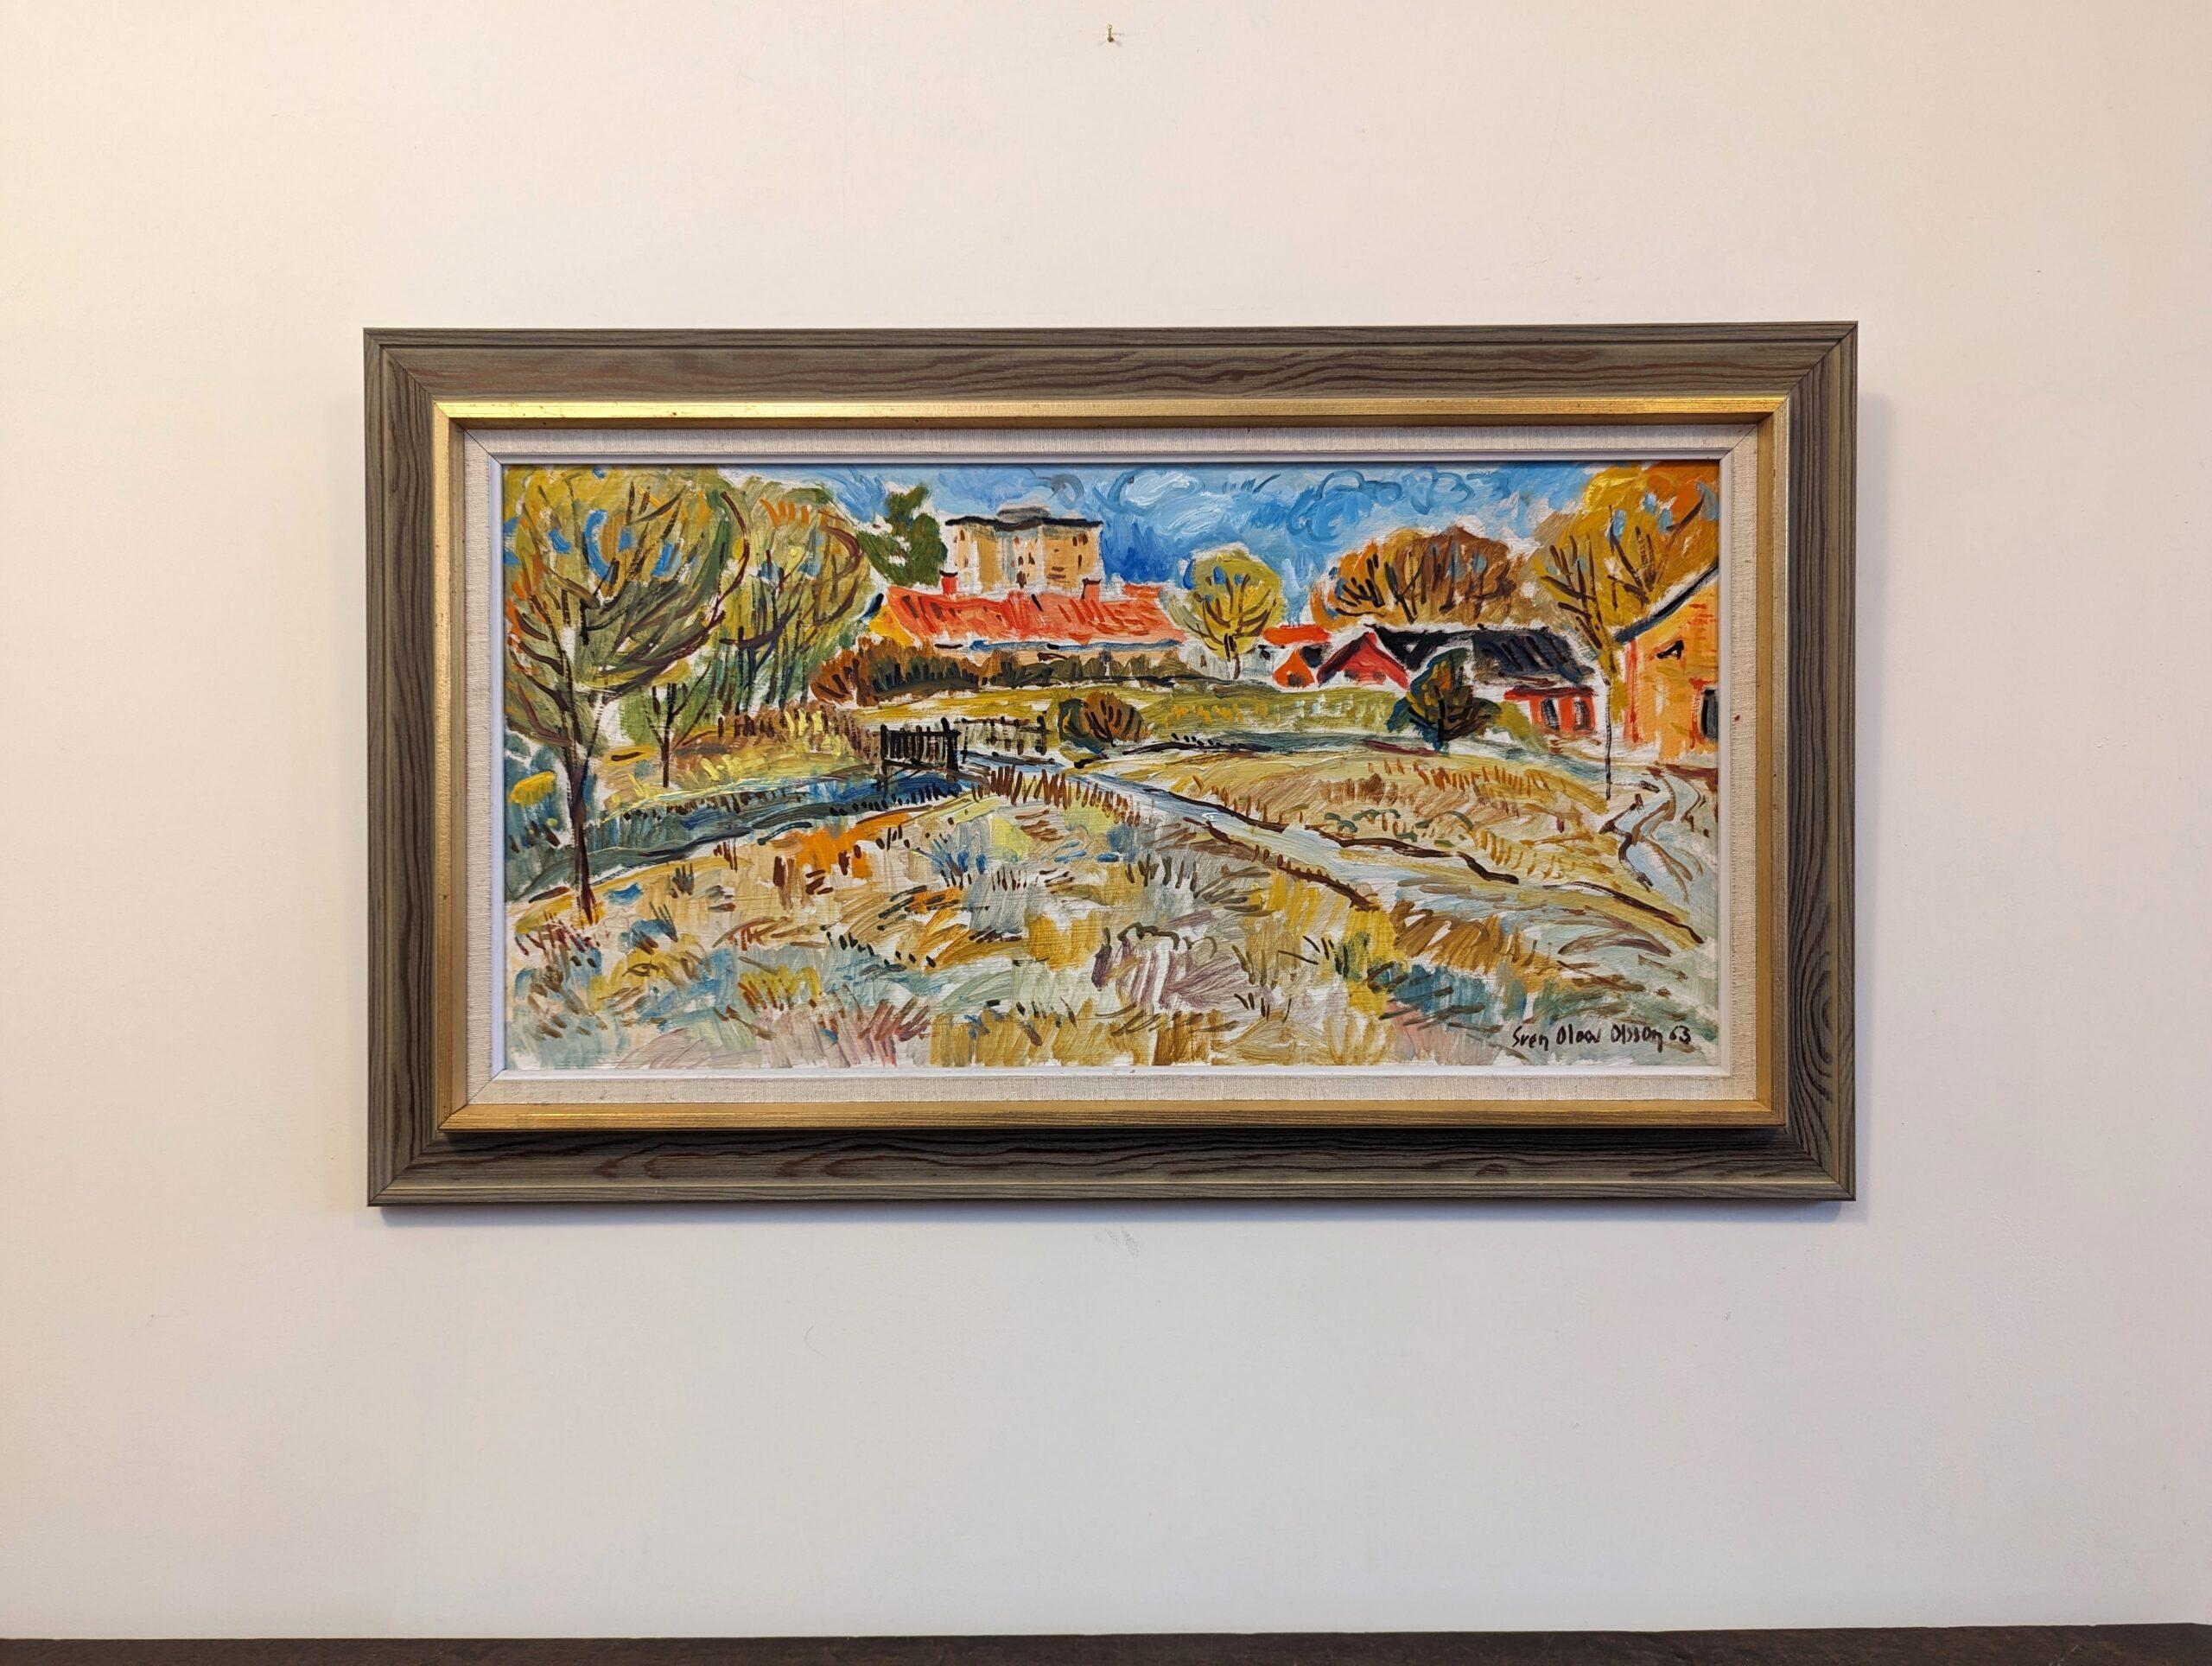 FAUVIST FIELD
Size: 43 x 73 cm (including frame)
Oil on board

A bright and vividly coloured mid century landscape composition, executed in oil onto board and dated 1963.

Characterised by strong colours and fierce brushwork, this painting carries